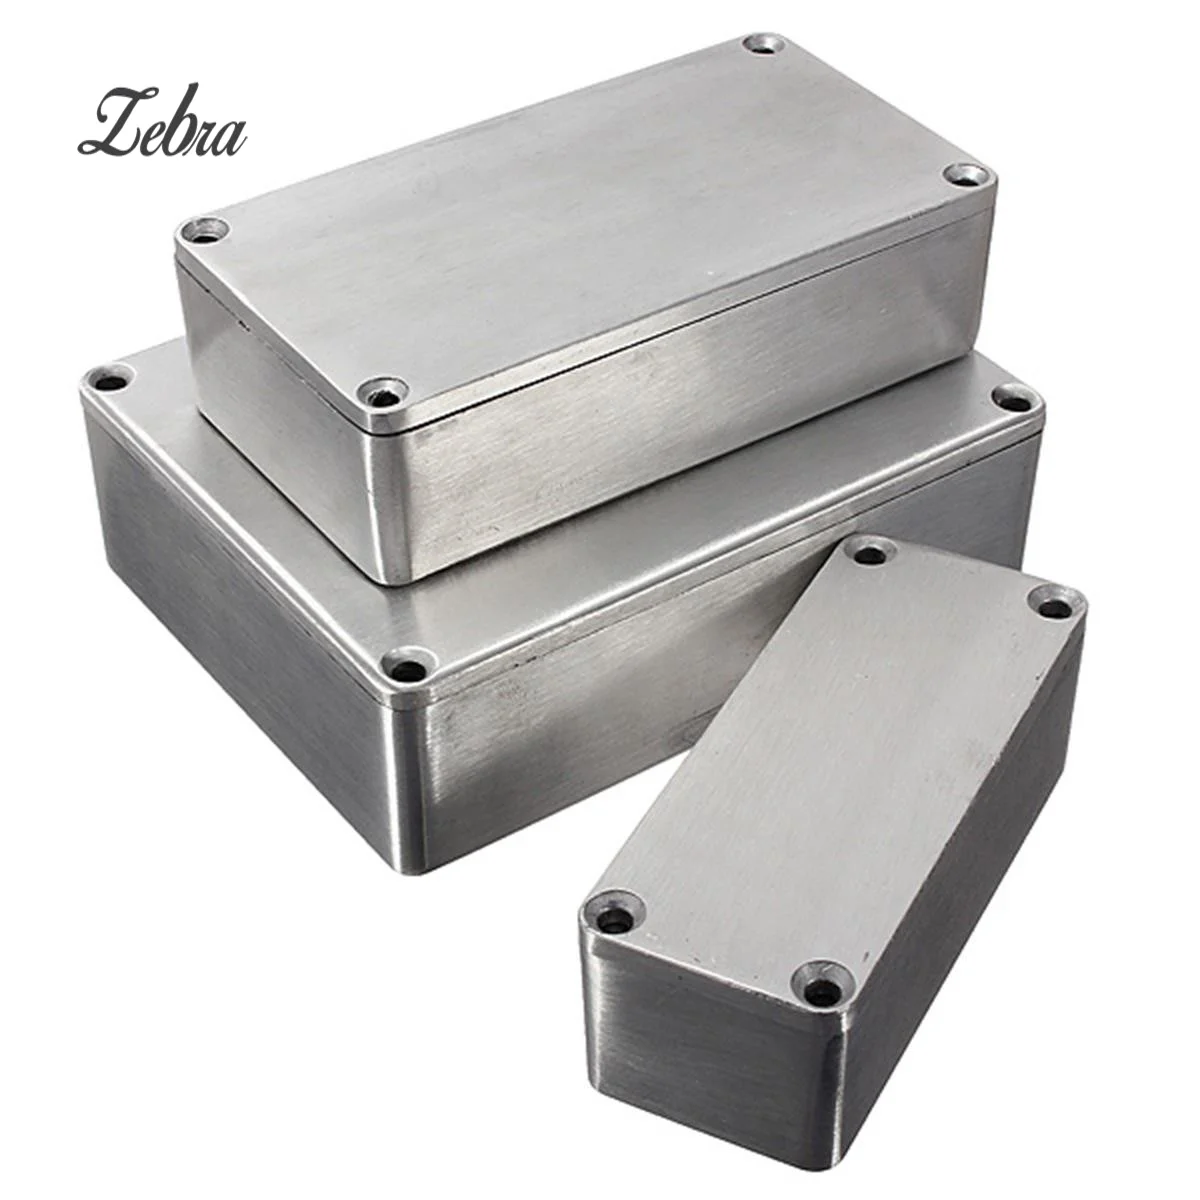 Details about   1590A 1590B 1590BB Style Aluminum Stomp Box Effects Pedal Enclosure For Guitar 